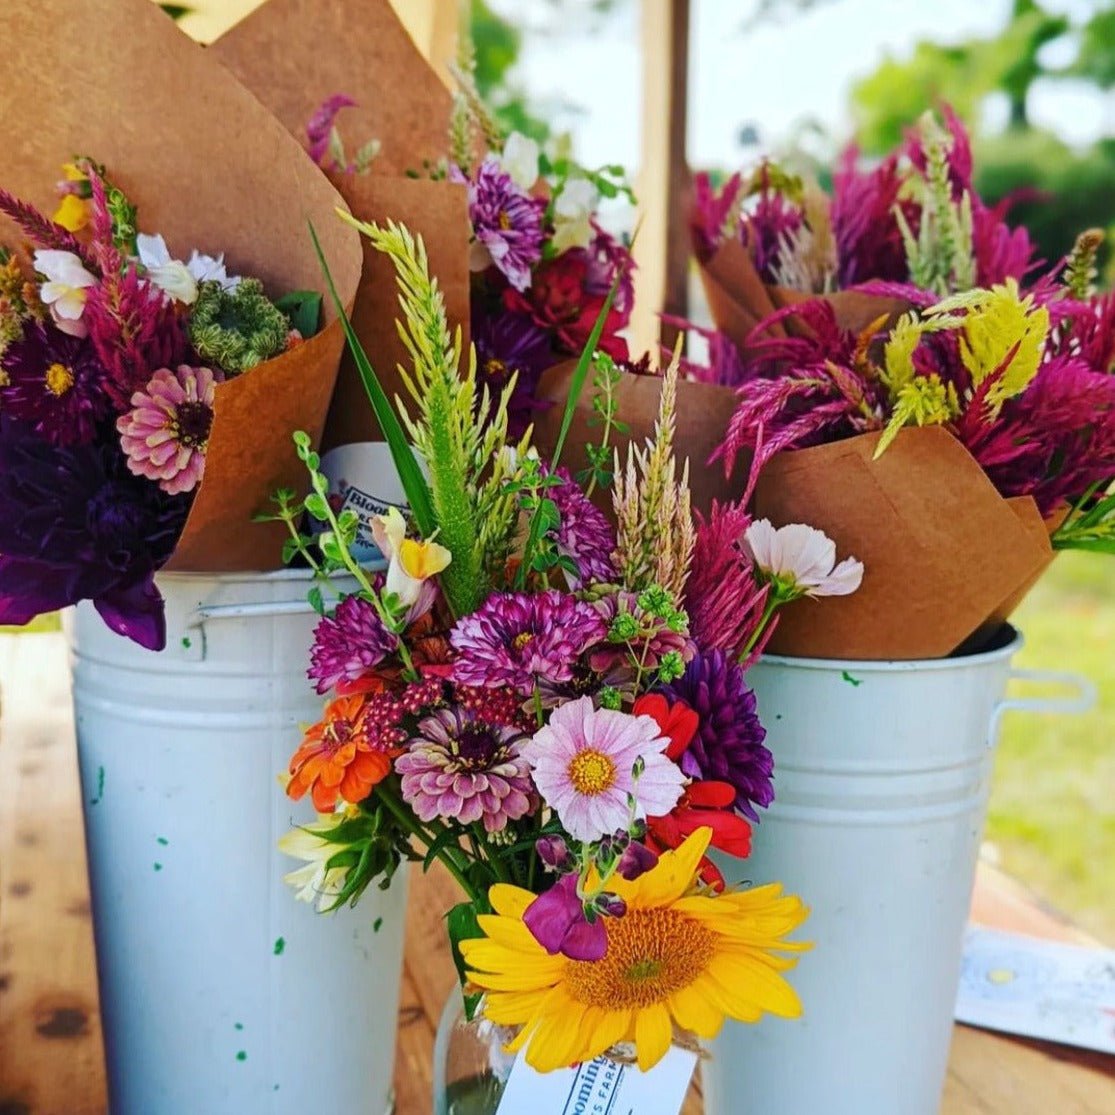 Blooming Acres Flowers - $30 - The Local Y'all